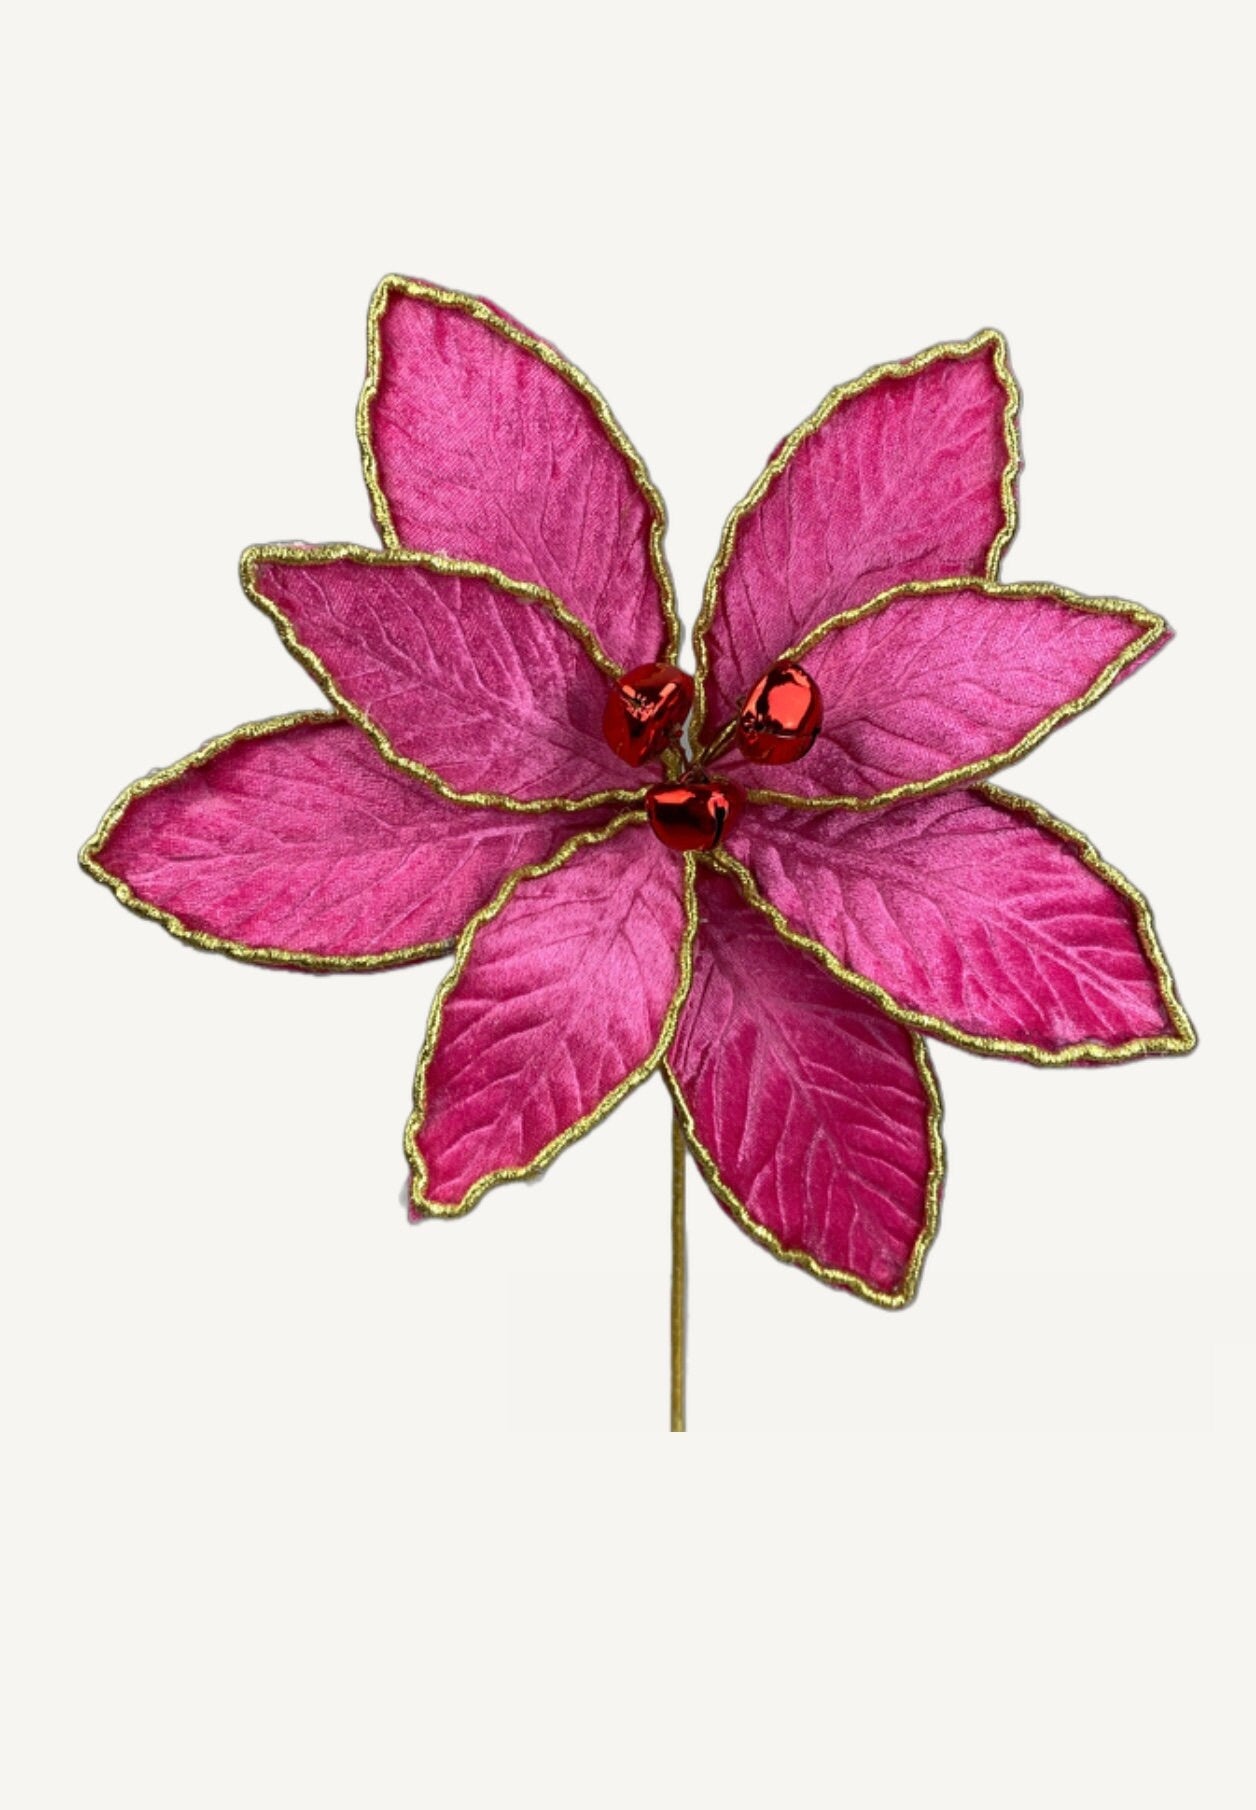 Pink Red Gold Velvet Poinsettia, Greenery, Floral Supplies, Wreath Christmas Tree Picks, Wreath Embellishments, Christmas, Craft Supply